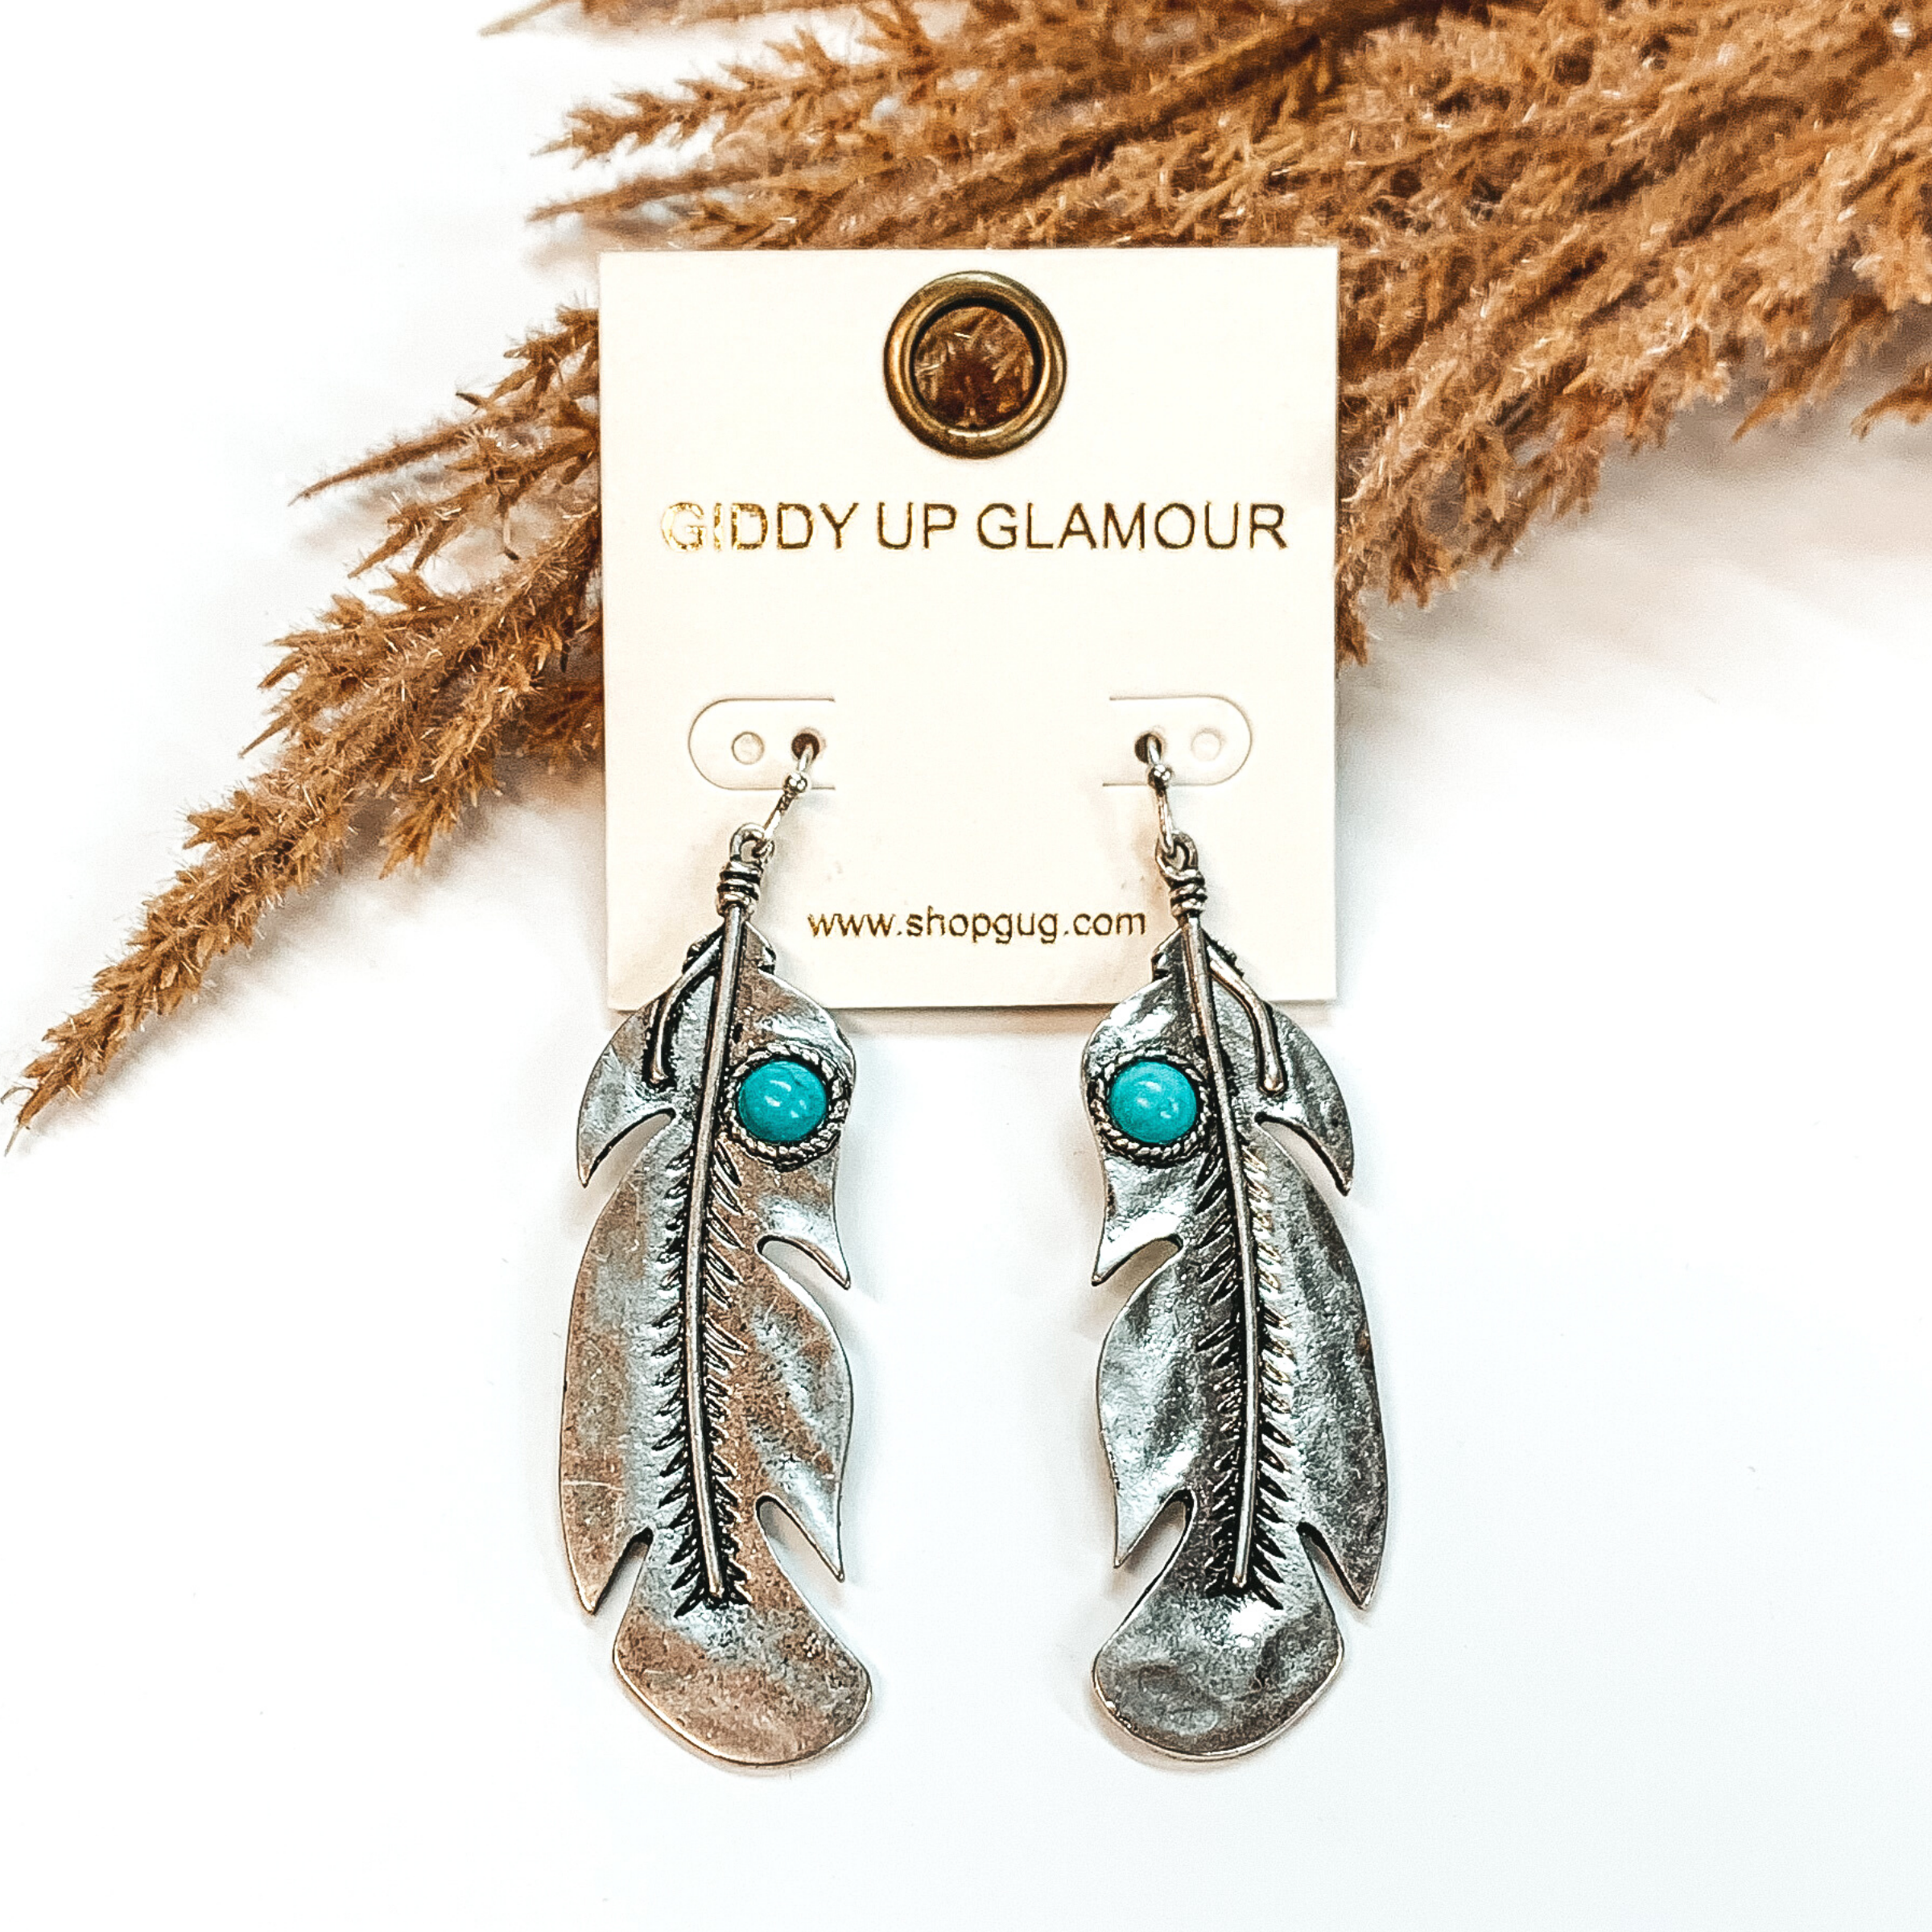 On silver fish hook earrings is a silver feather pendant with engraved deather detaileing. Towards the top of each feather, there is a small, circle turquoise stone. These earrings are pictured on a white background in front of brown floral decor.